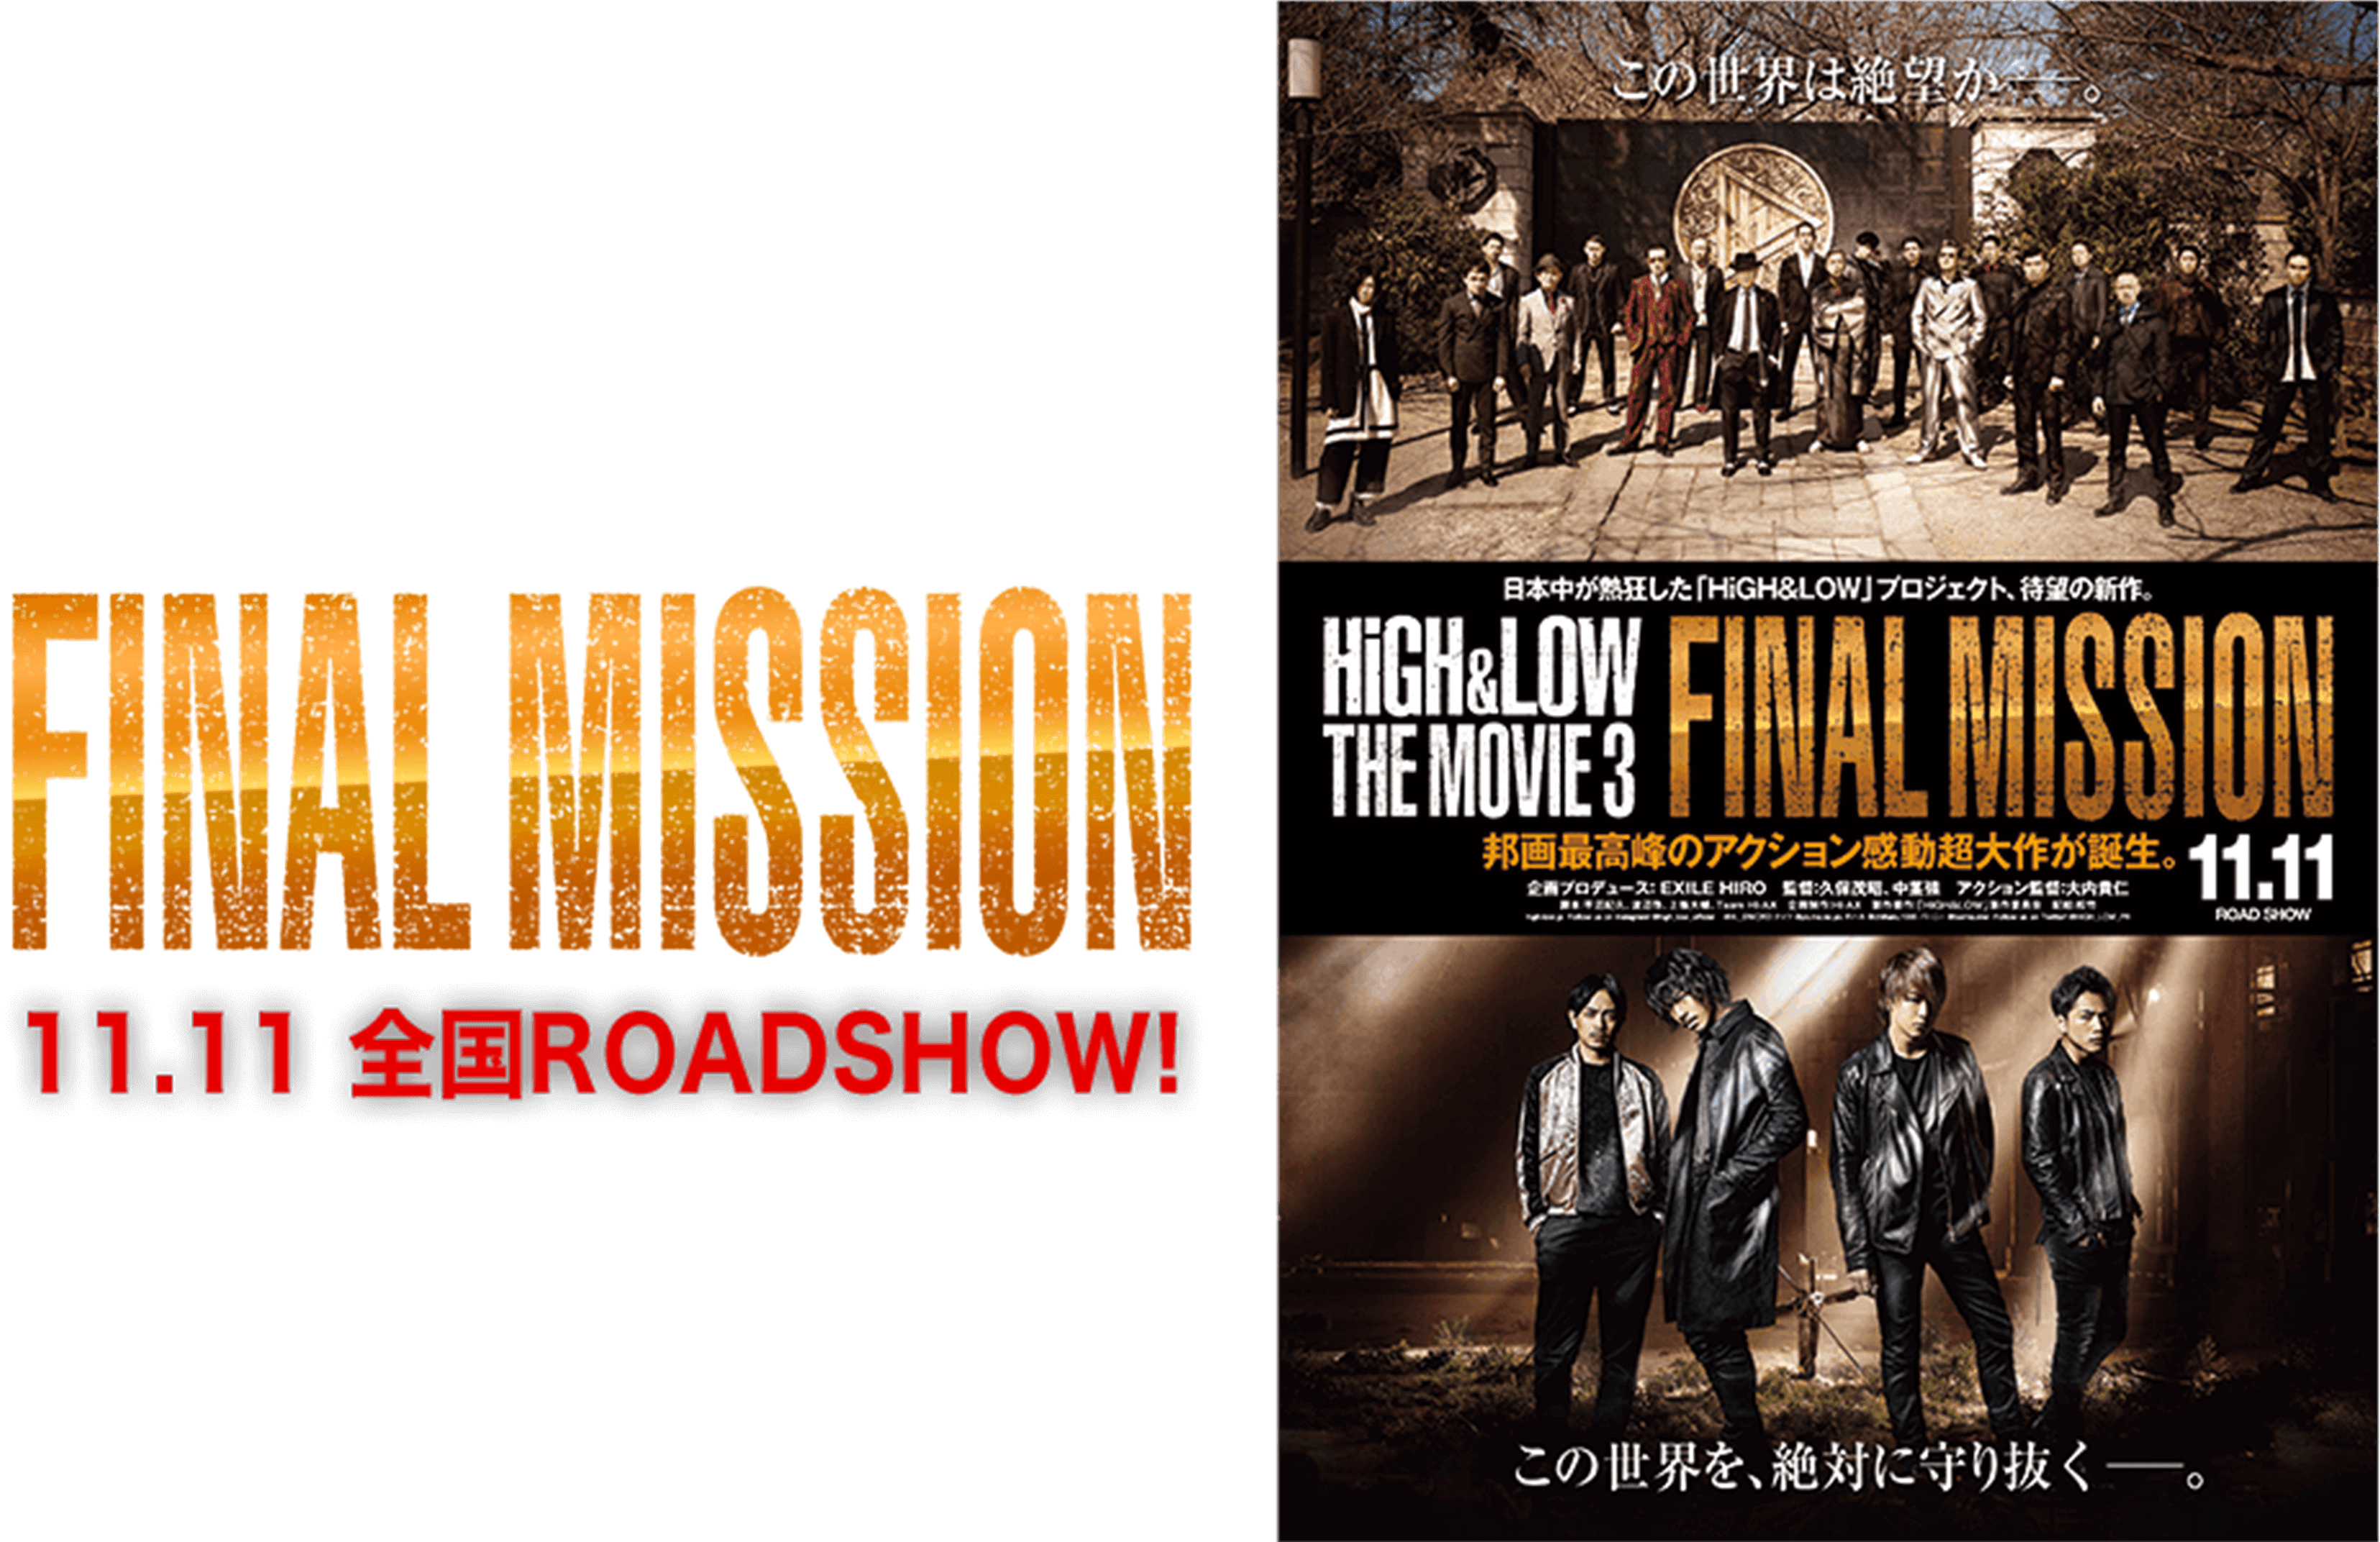 high & low the movie 3 final mission full movie download